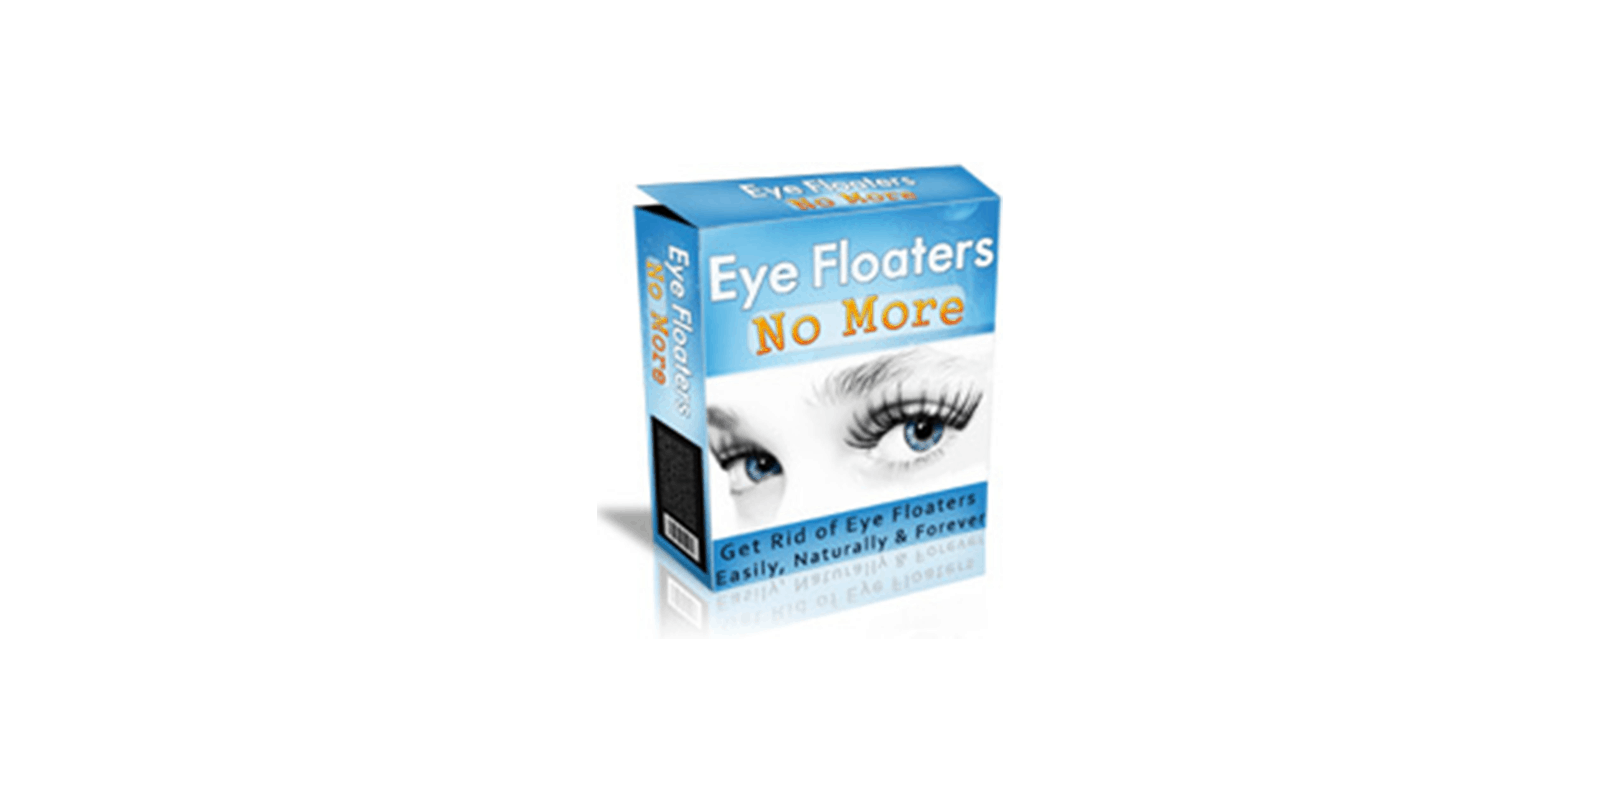 Eye Floaters No More Reviews